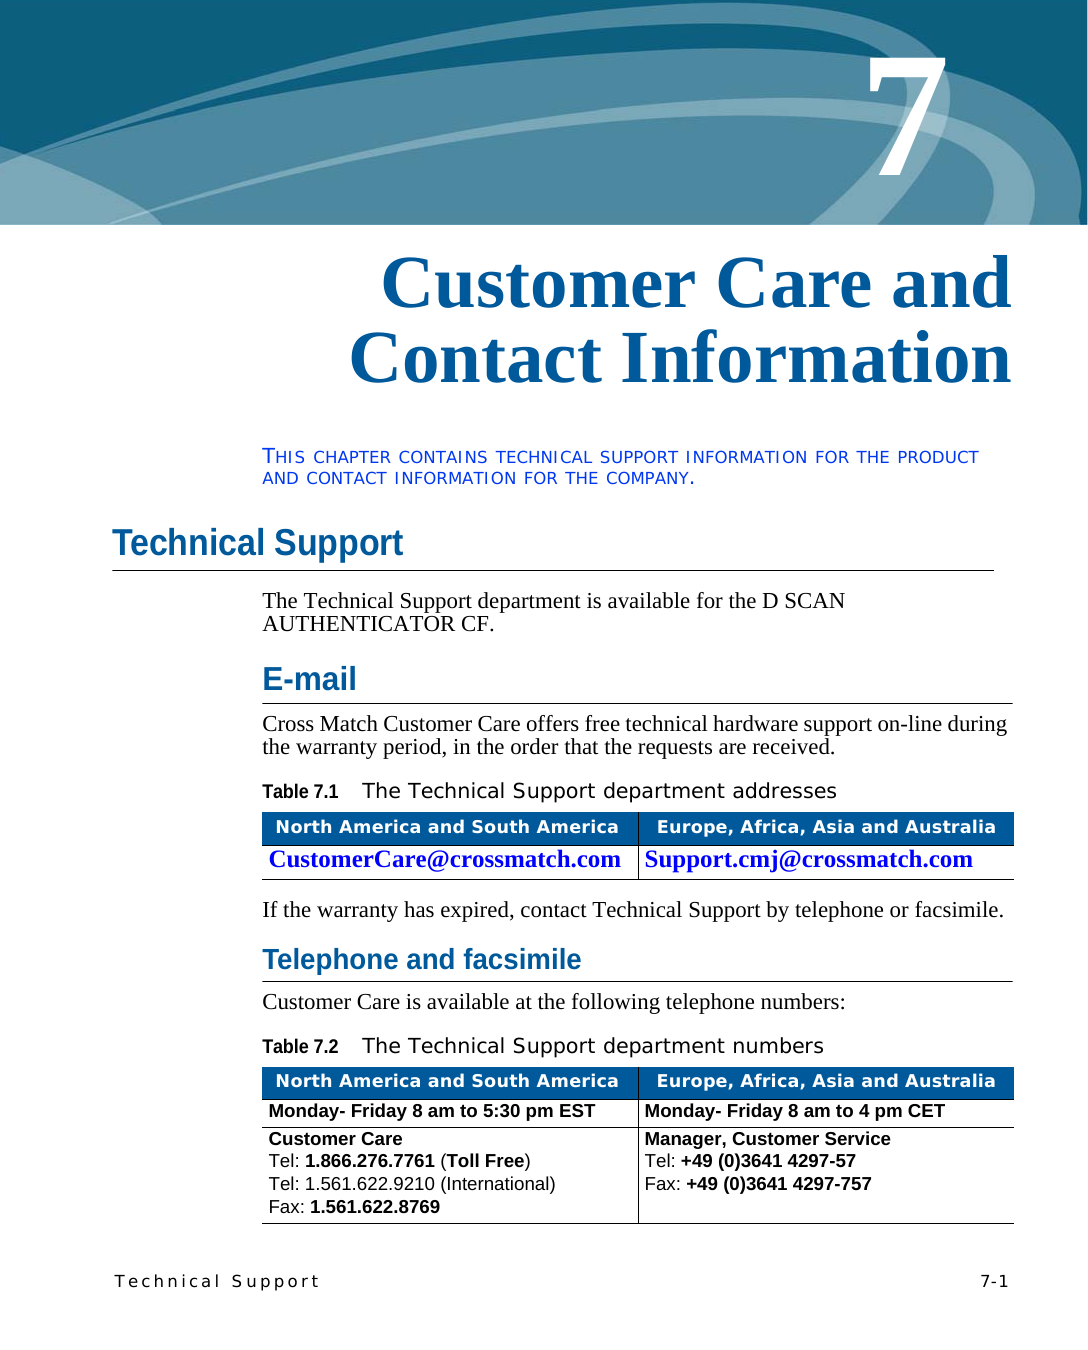 Technical Support   7-17Chapter 0Customer Care and Contact InformationTHIS CHAPTER CONTAINS TECHNICAL SUPPORT INFORMATION FOR THE PRODUCT AND CONTACT INFORMATION FOR THE COMPANY.Technical SupportThe Technical Support department is available for the D SCAN AUTHENTICATOR CF.E-mailCross Match Customer Care offers free technical hardware support on-line during the warranty period, in the order that the requests are received.If the warranty has expired, contact Technical Support by telephone or facsimile.Telephone and facsimileCustomer Care is available at the following telephone numbers:Table 7.1The Technical Support department addressesNorth America and South America  Europe, Africa, Asia and AustraliaCustomerCare@crossmatch.com Support.cmj@crossmatch.comTable 7.2The Technical Support department numbersNorth America and South America  Europe, Africa, Asia and AustraliaMonday- Friday 8 am to 5:30 pm EST Monday- Friday 8 am to 4 pm CETCustomer CareTel: 1.866.276.7761 (Toll Free)Tel: 1.561.622.9210 (International)Fax: 1.561.622.8769Manager, Customer ServiceTel: +49 (0)3641 4297-57Fax: +49 (0)3641 4297-757